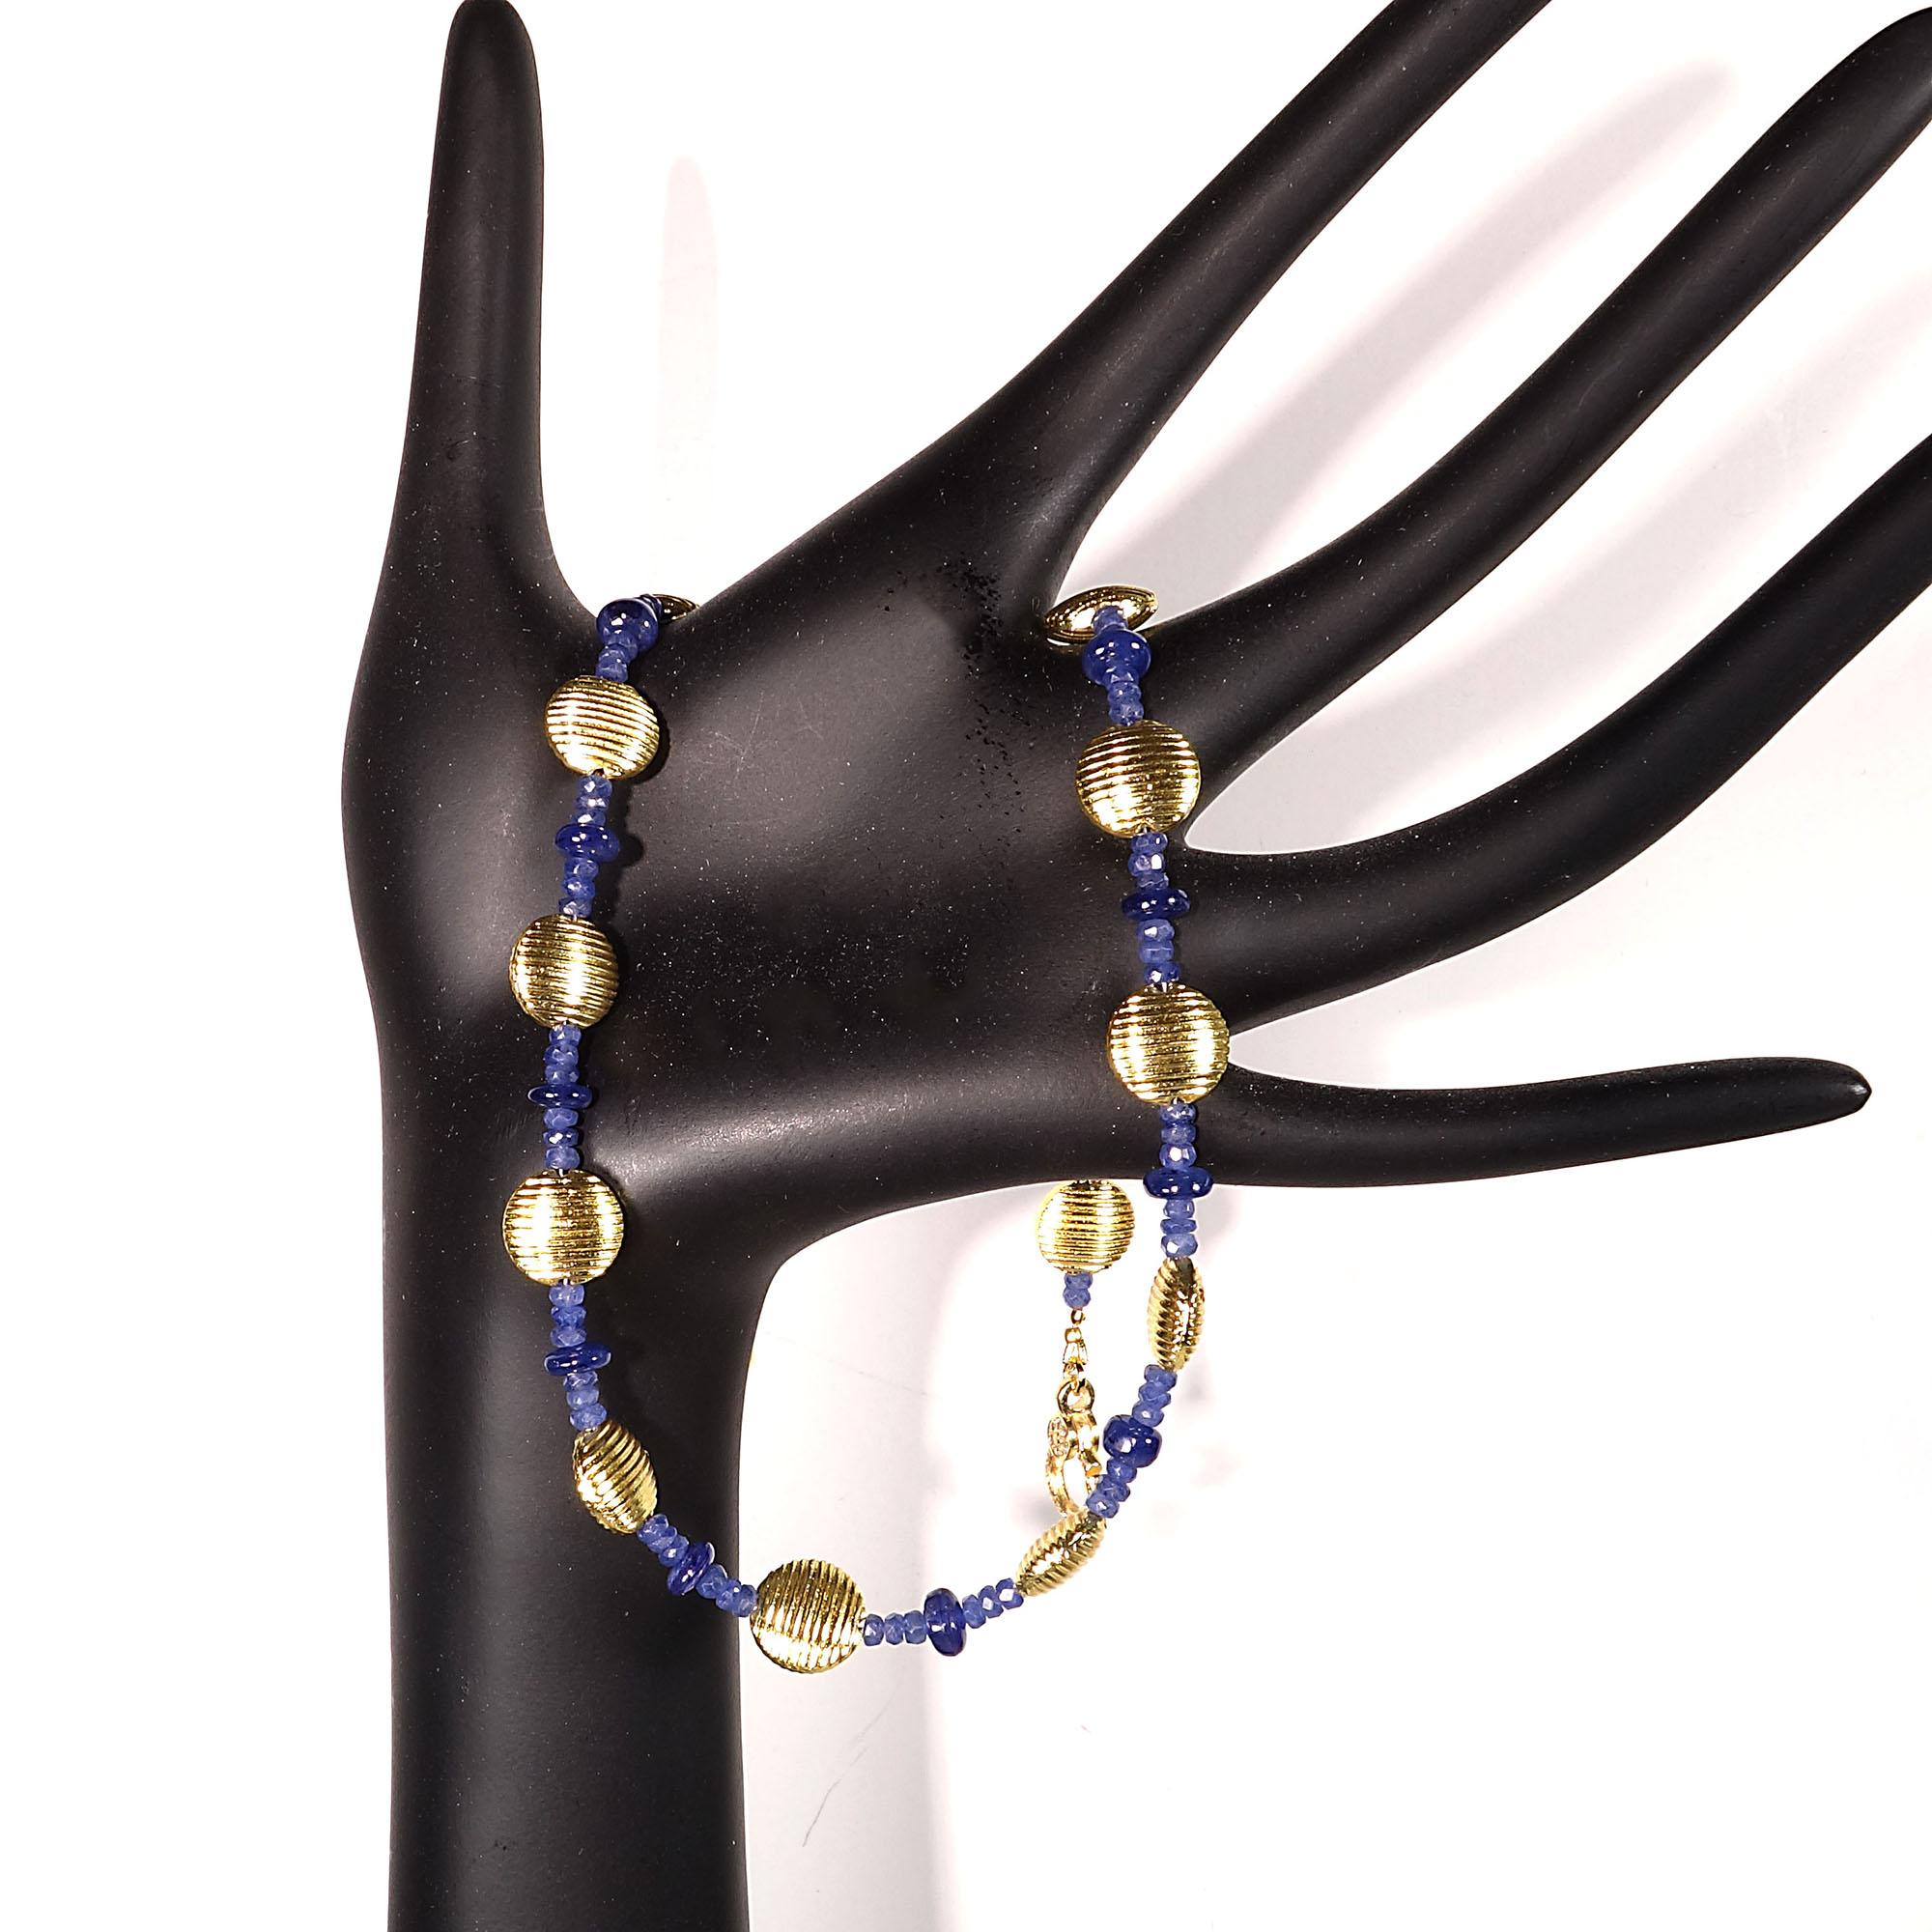  AJD Elegant Blue Sapphire and Gold Choker Necklace  Great Gift!! For Sale 1